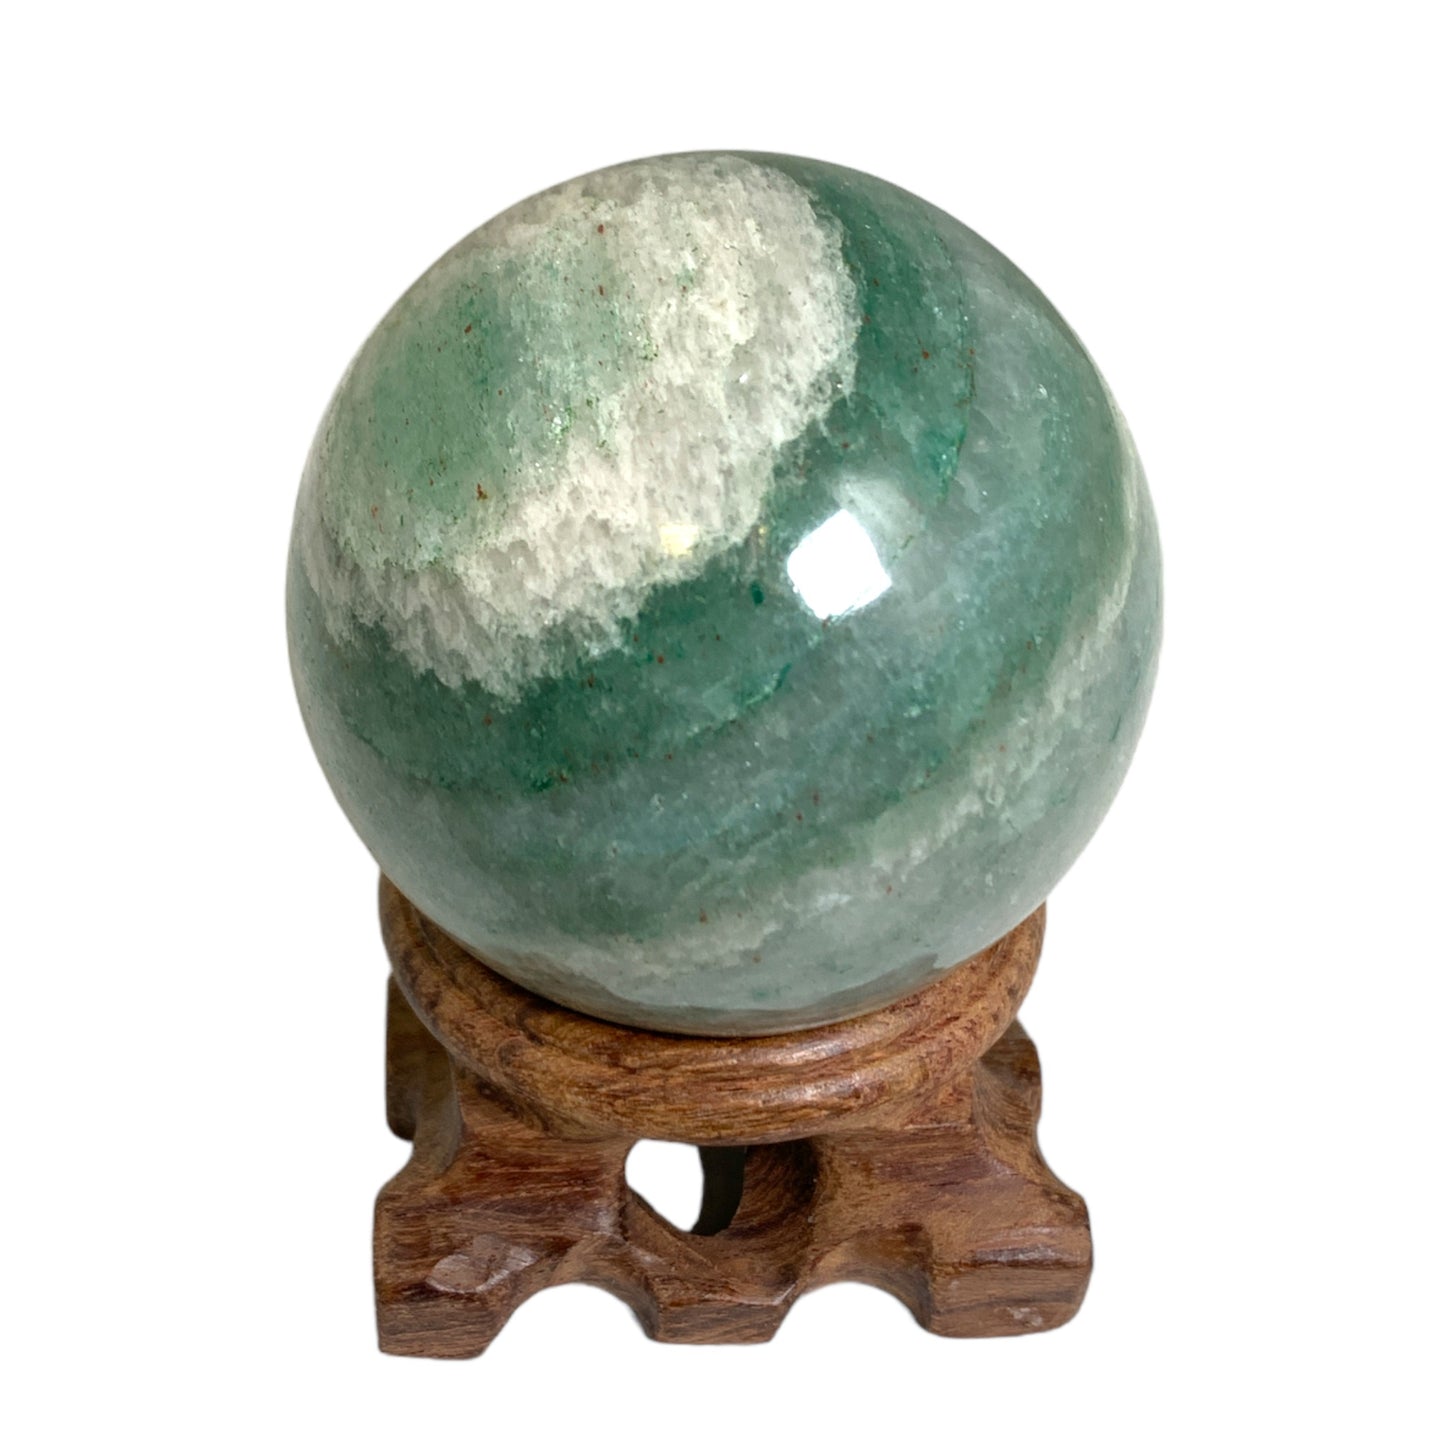 GREEN AVENTURINE - 40-90mm - Sphere - Sold by the gram - India - NEW323